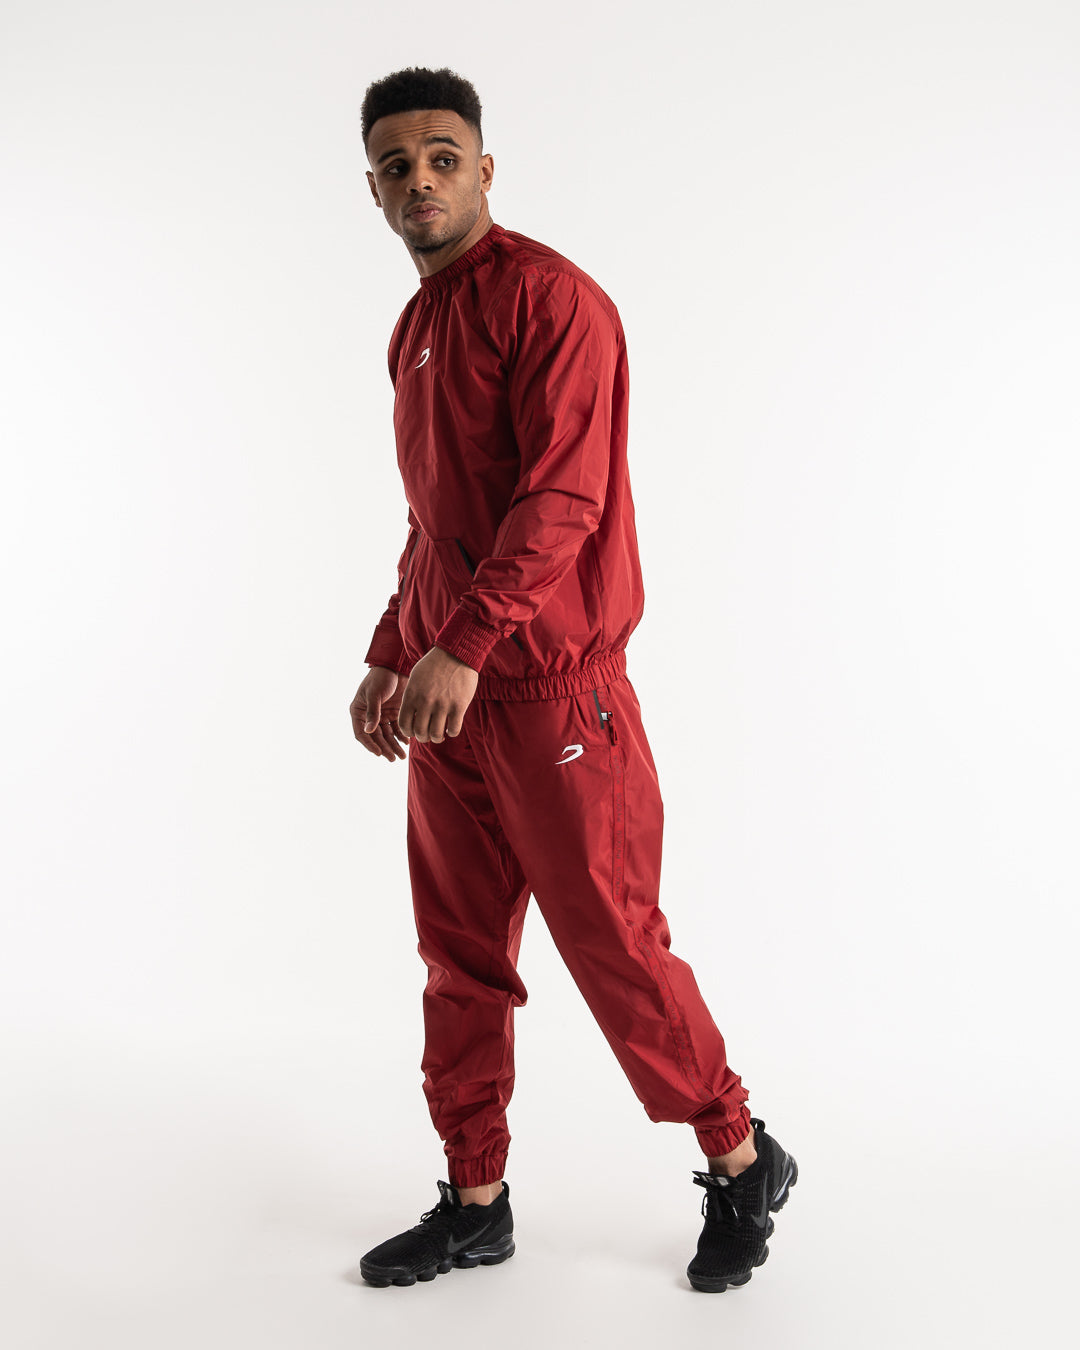 Hagler Sauna Suit 2.0 - Red, Essential Weight Loss Tool